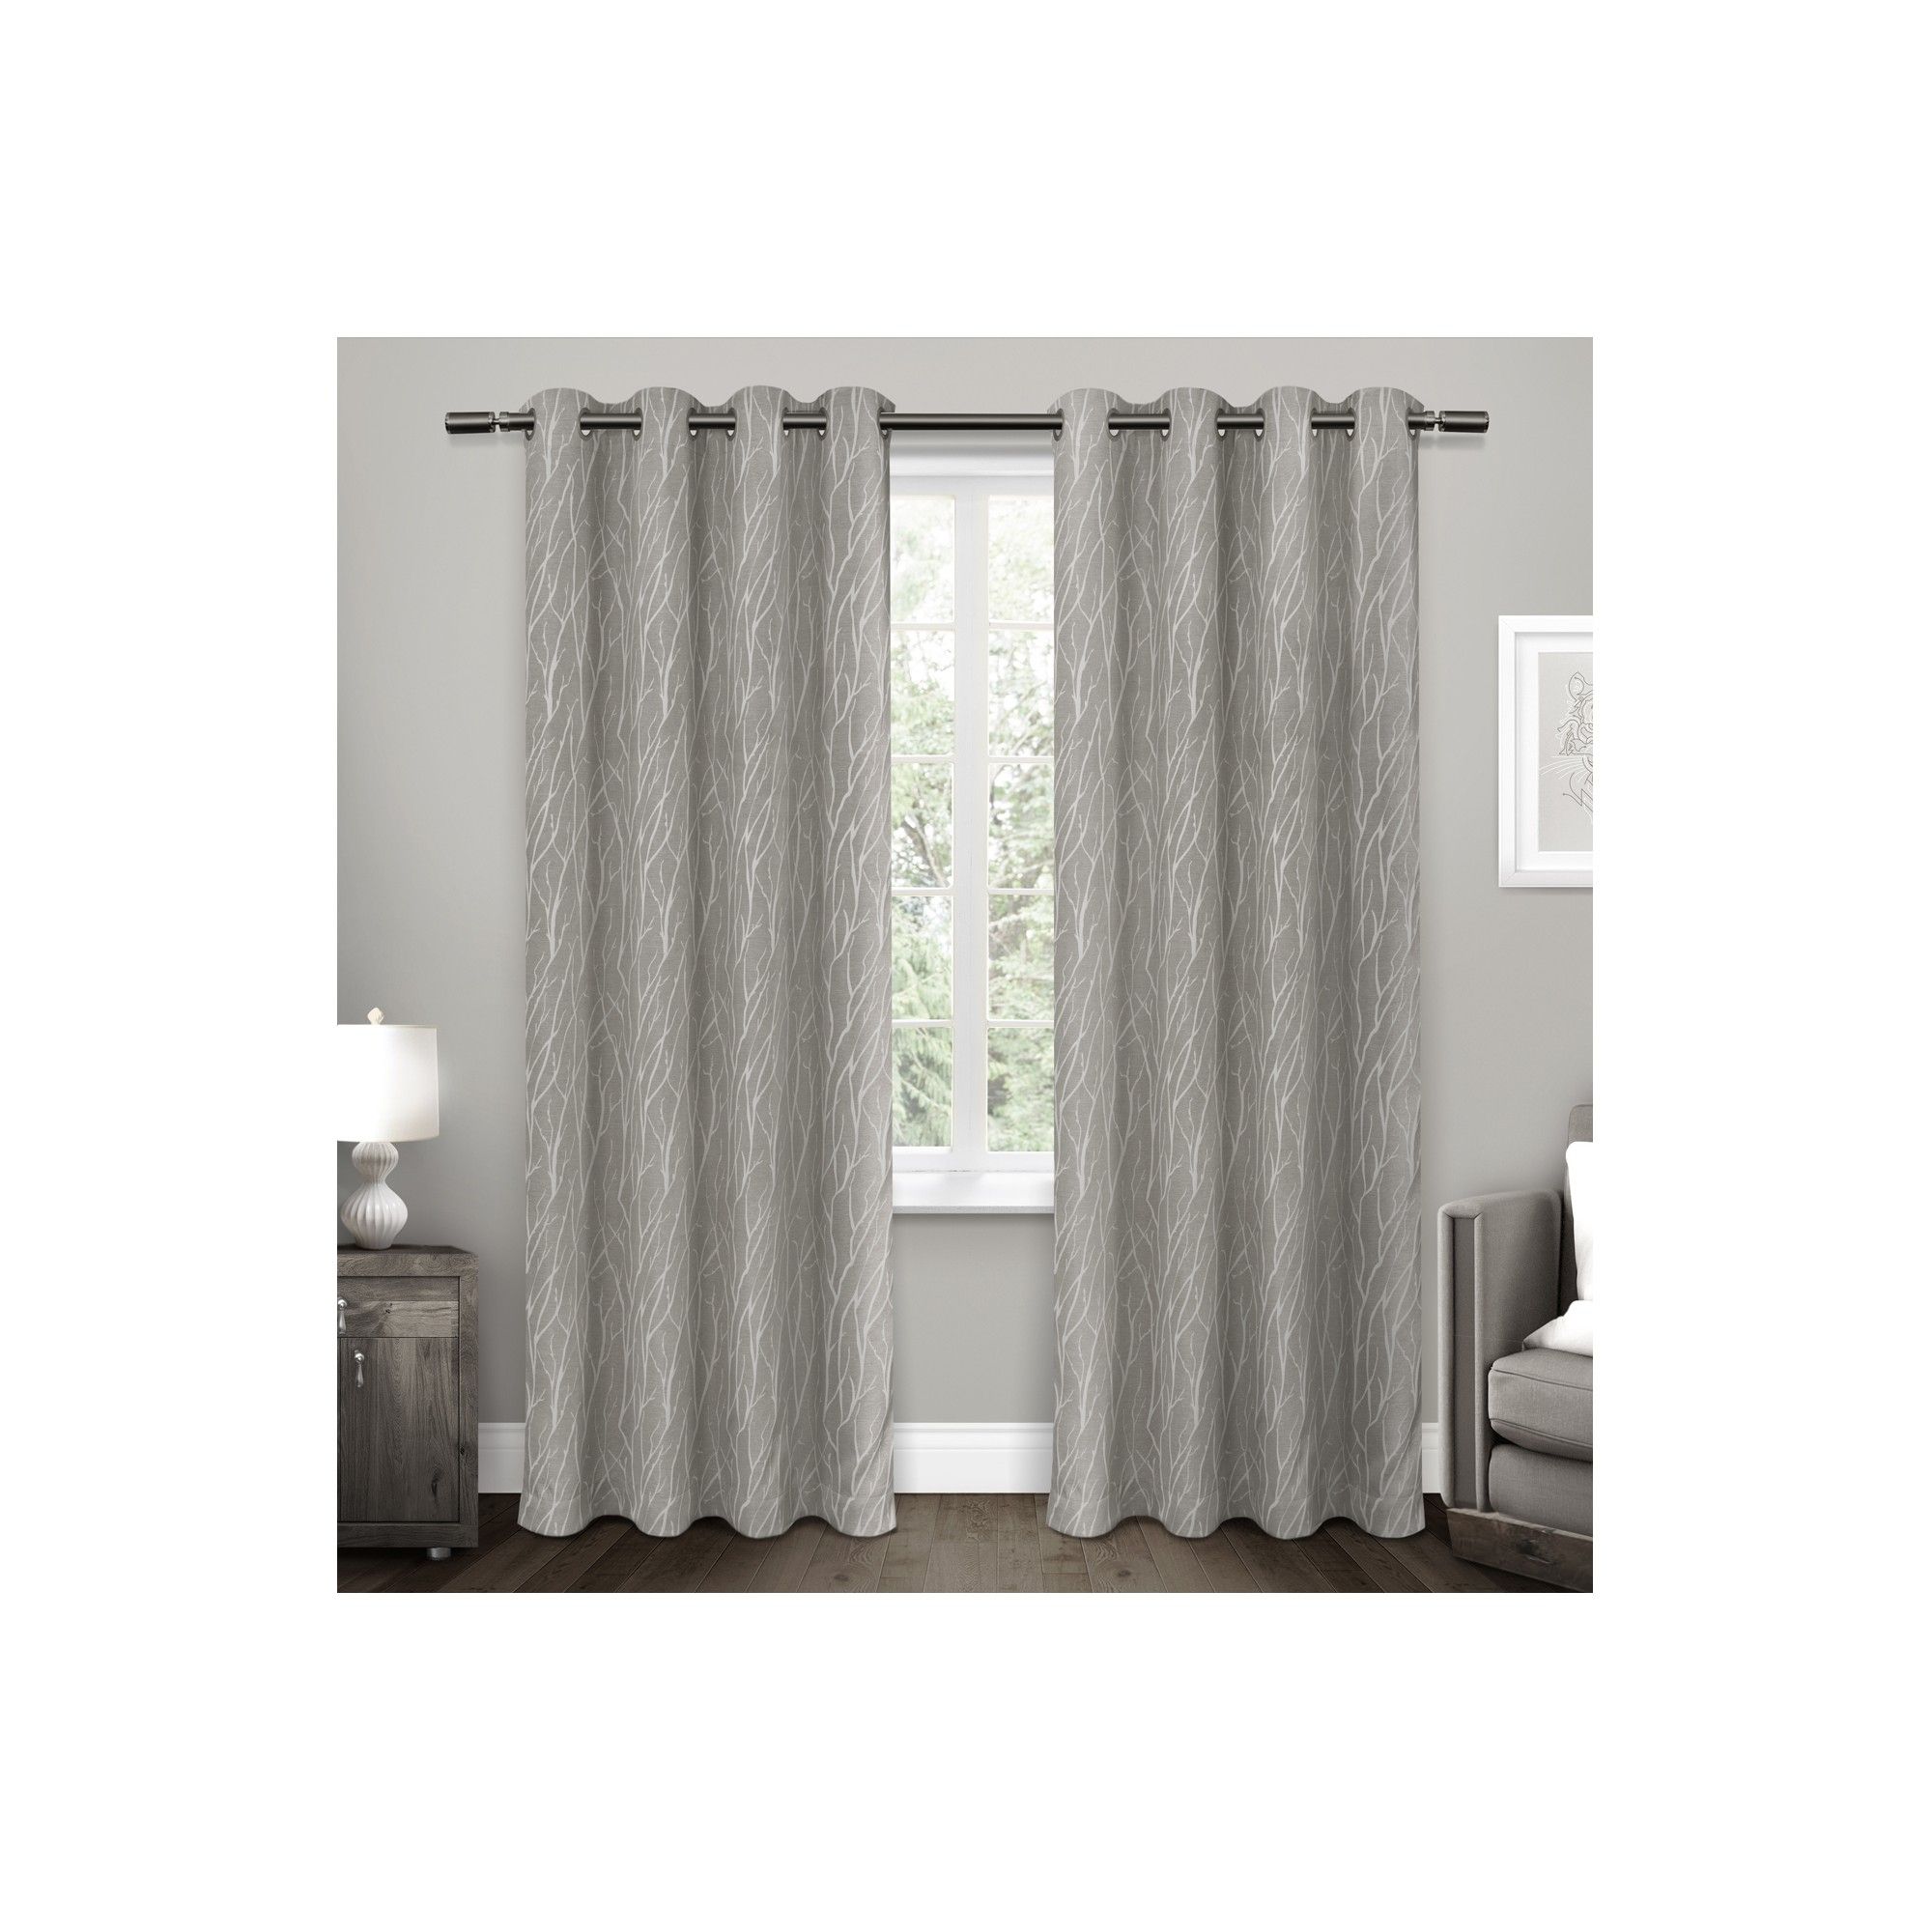 Forest Hill Woven Room Darkening Grommet Top Window Curtain With Regard To Forest Hill Woven Blackout Grommet Top Curtain Panel Pairs (View 9 of 20)